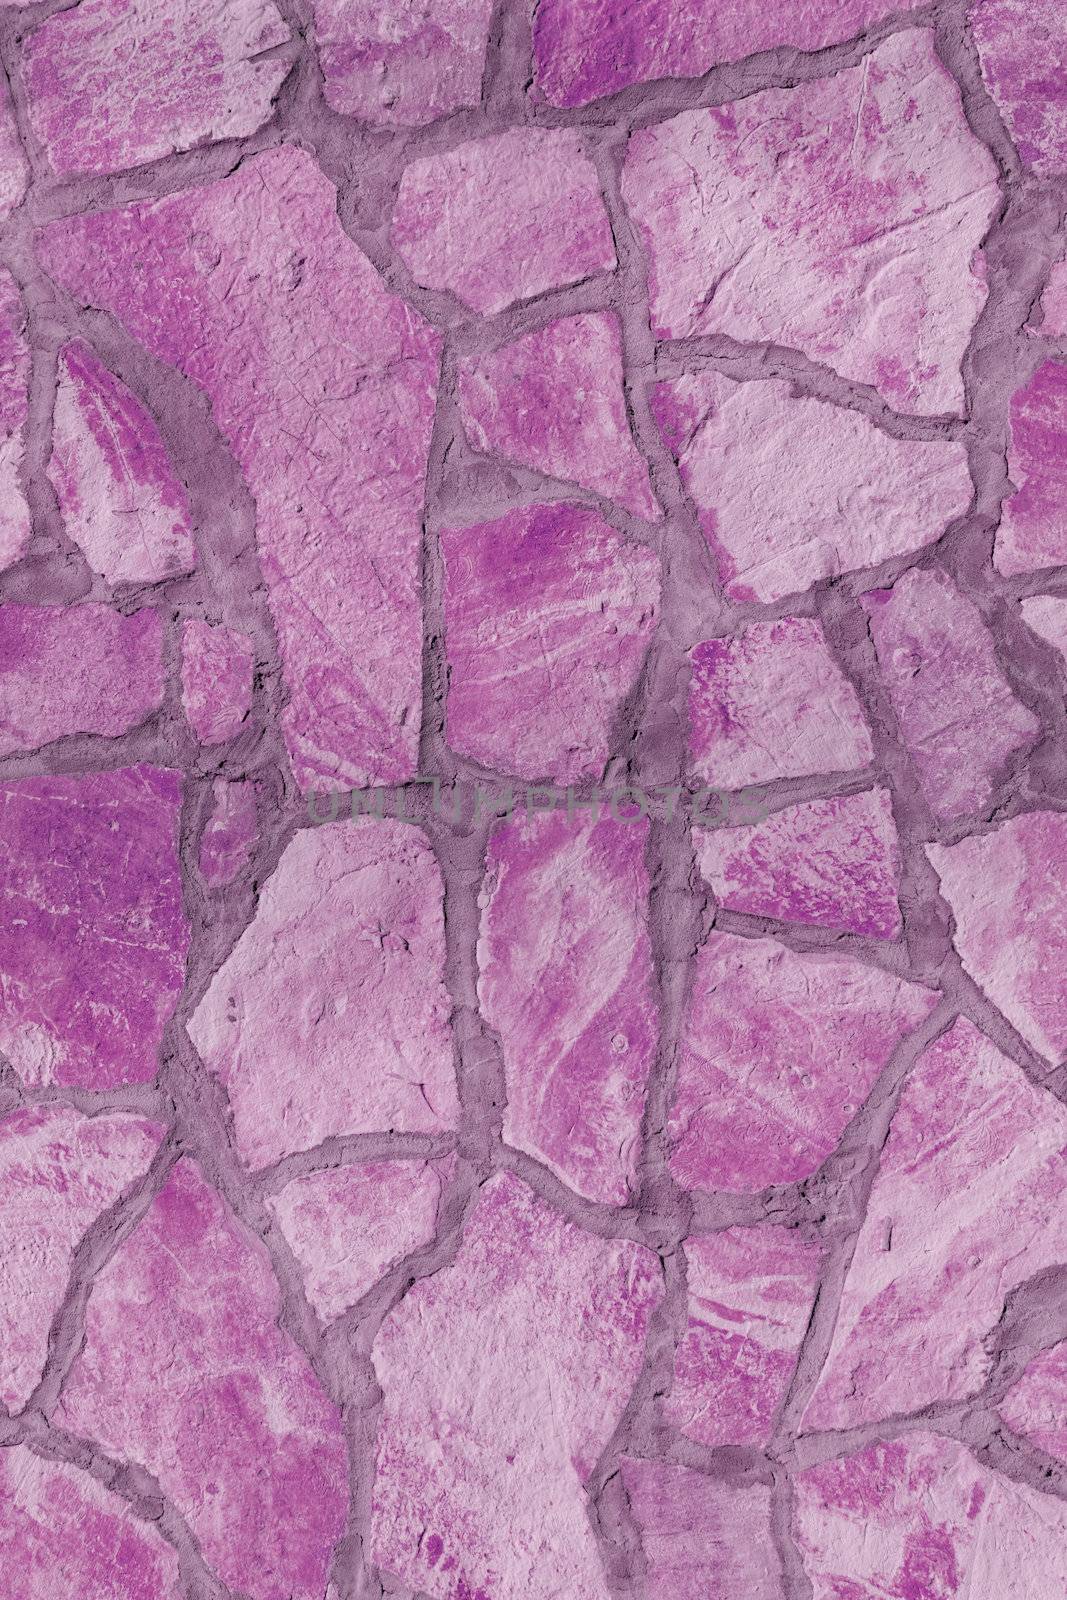 Background of a large stone wall texture (purple)